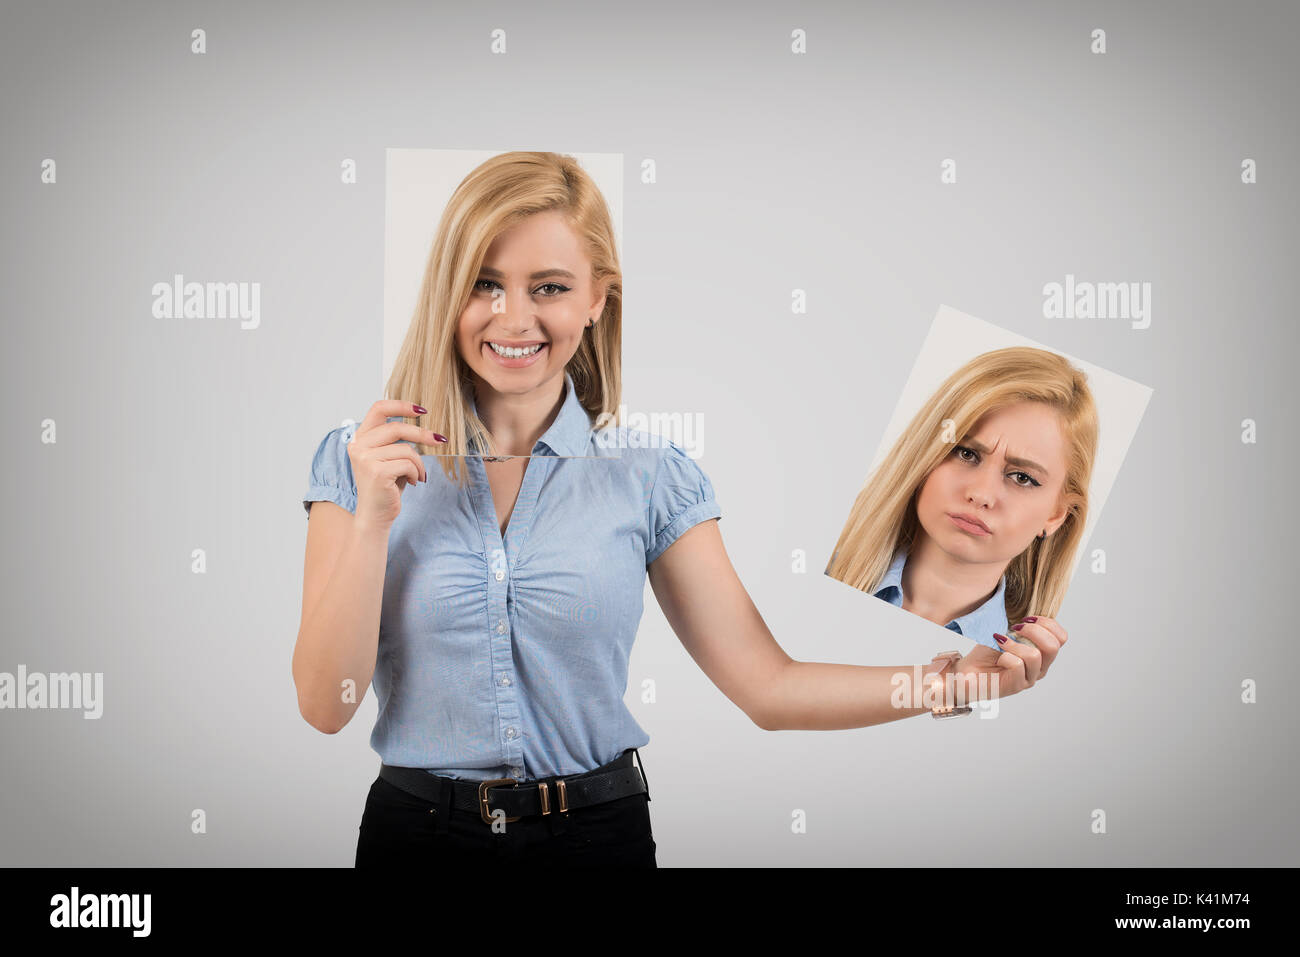 Young woman changing mood from being happy to getting upset and angry Stock Photo